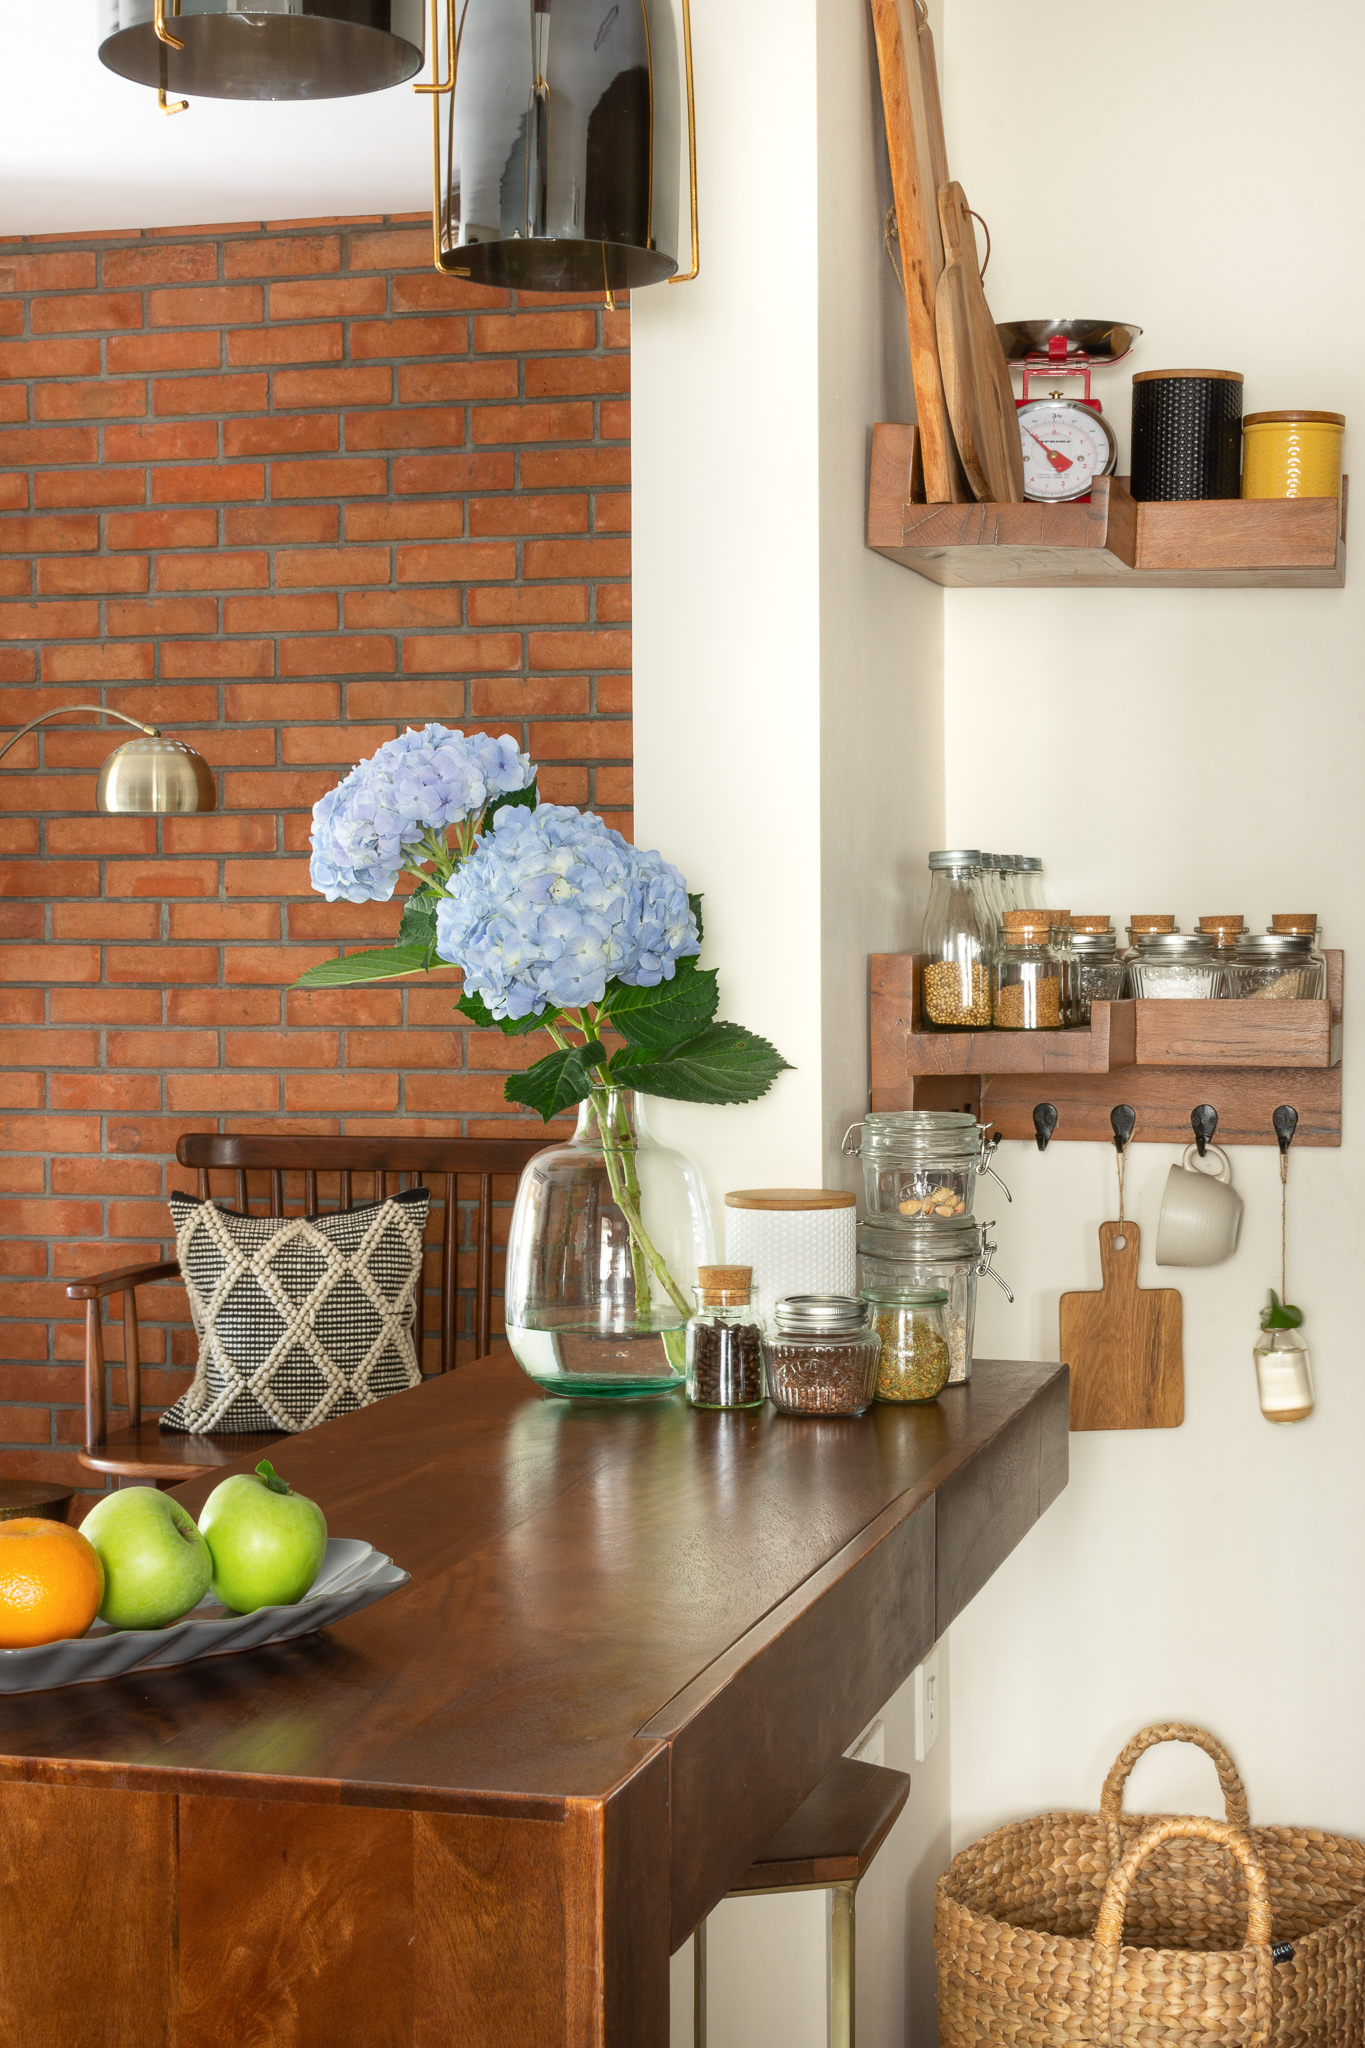 Neat and clean kitchen corner spice shelves with breakfast counter | Nehal's Bengaluru Styling Apartment